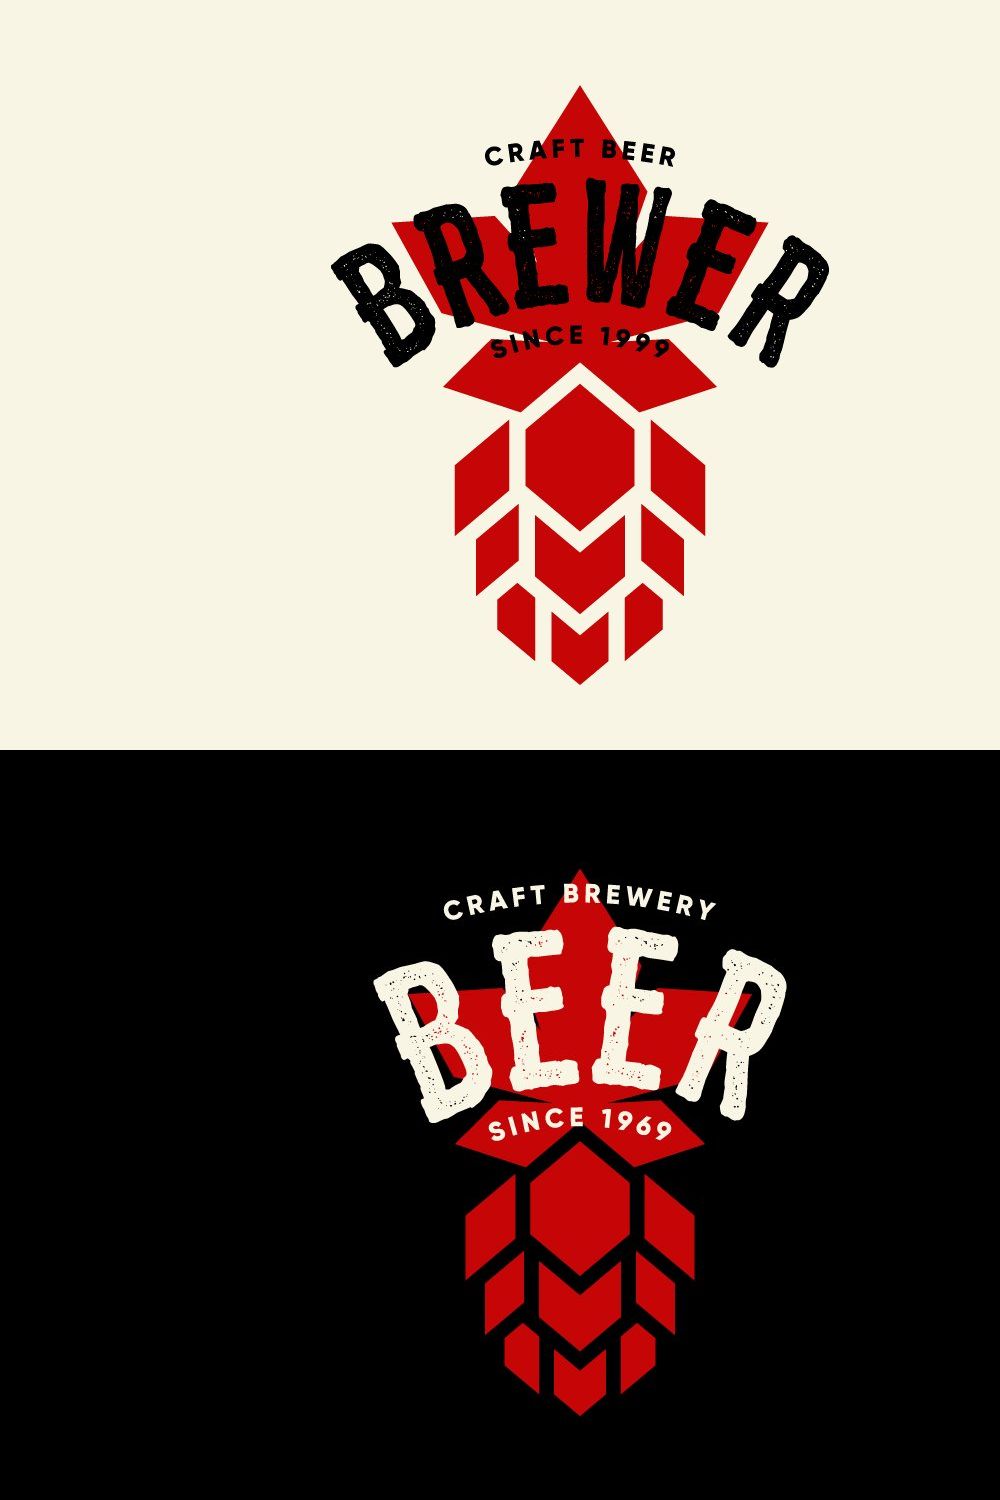 Craft beer brewery vector logo pinterest preview image.